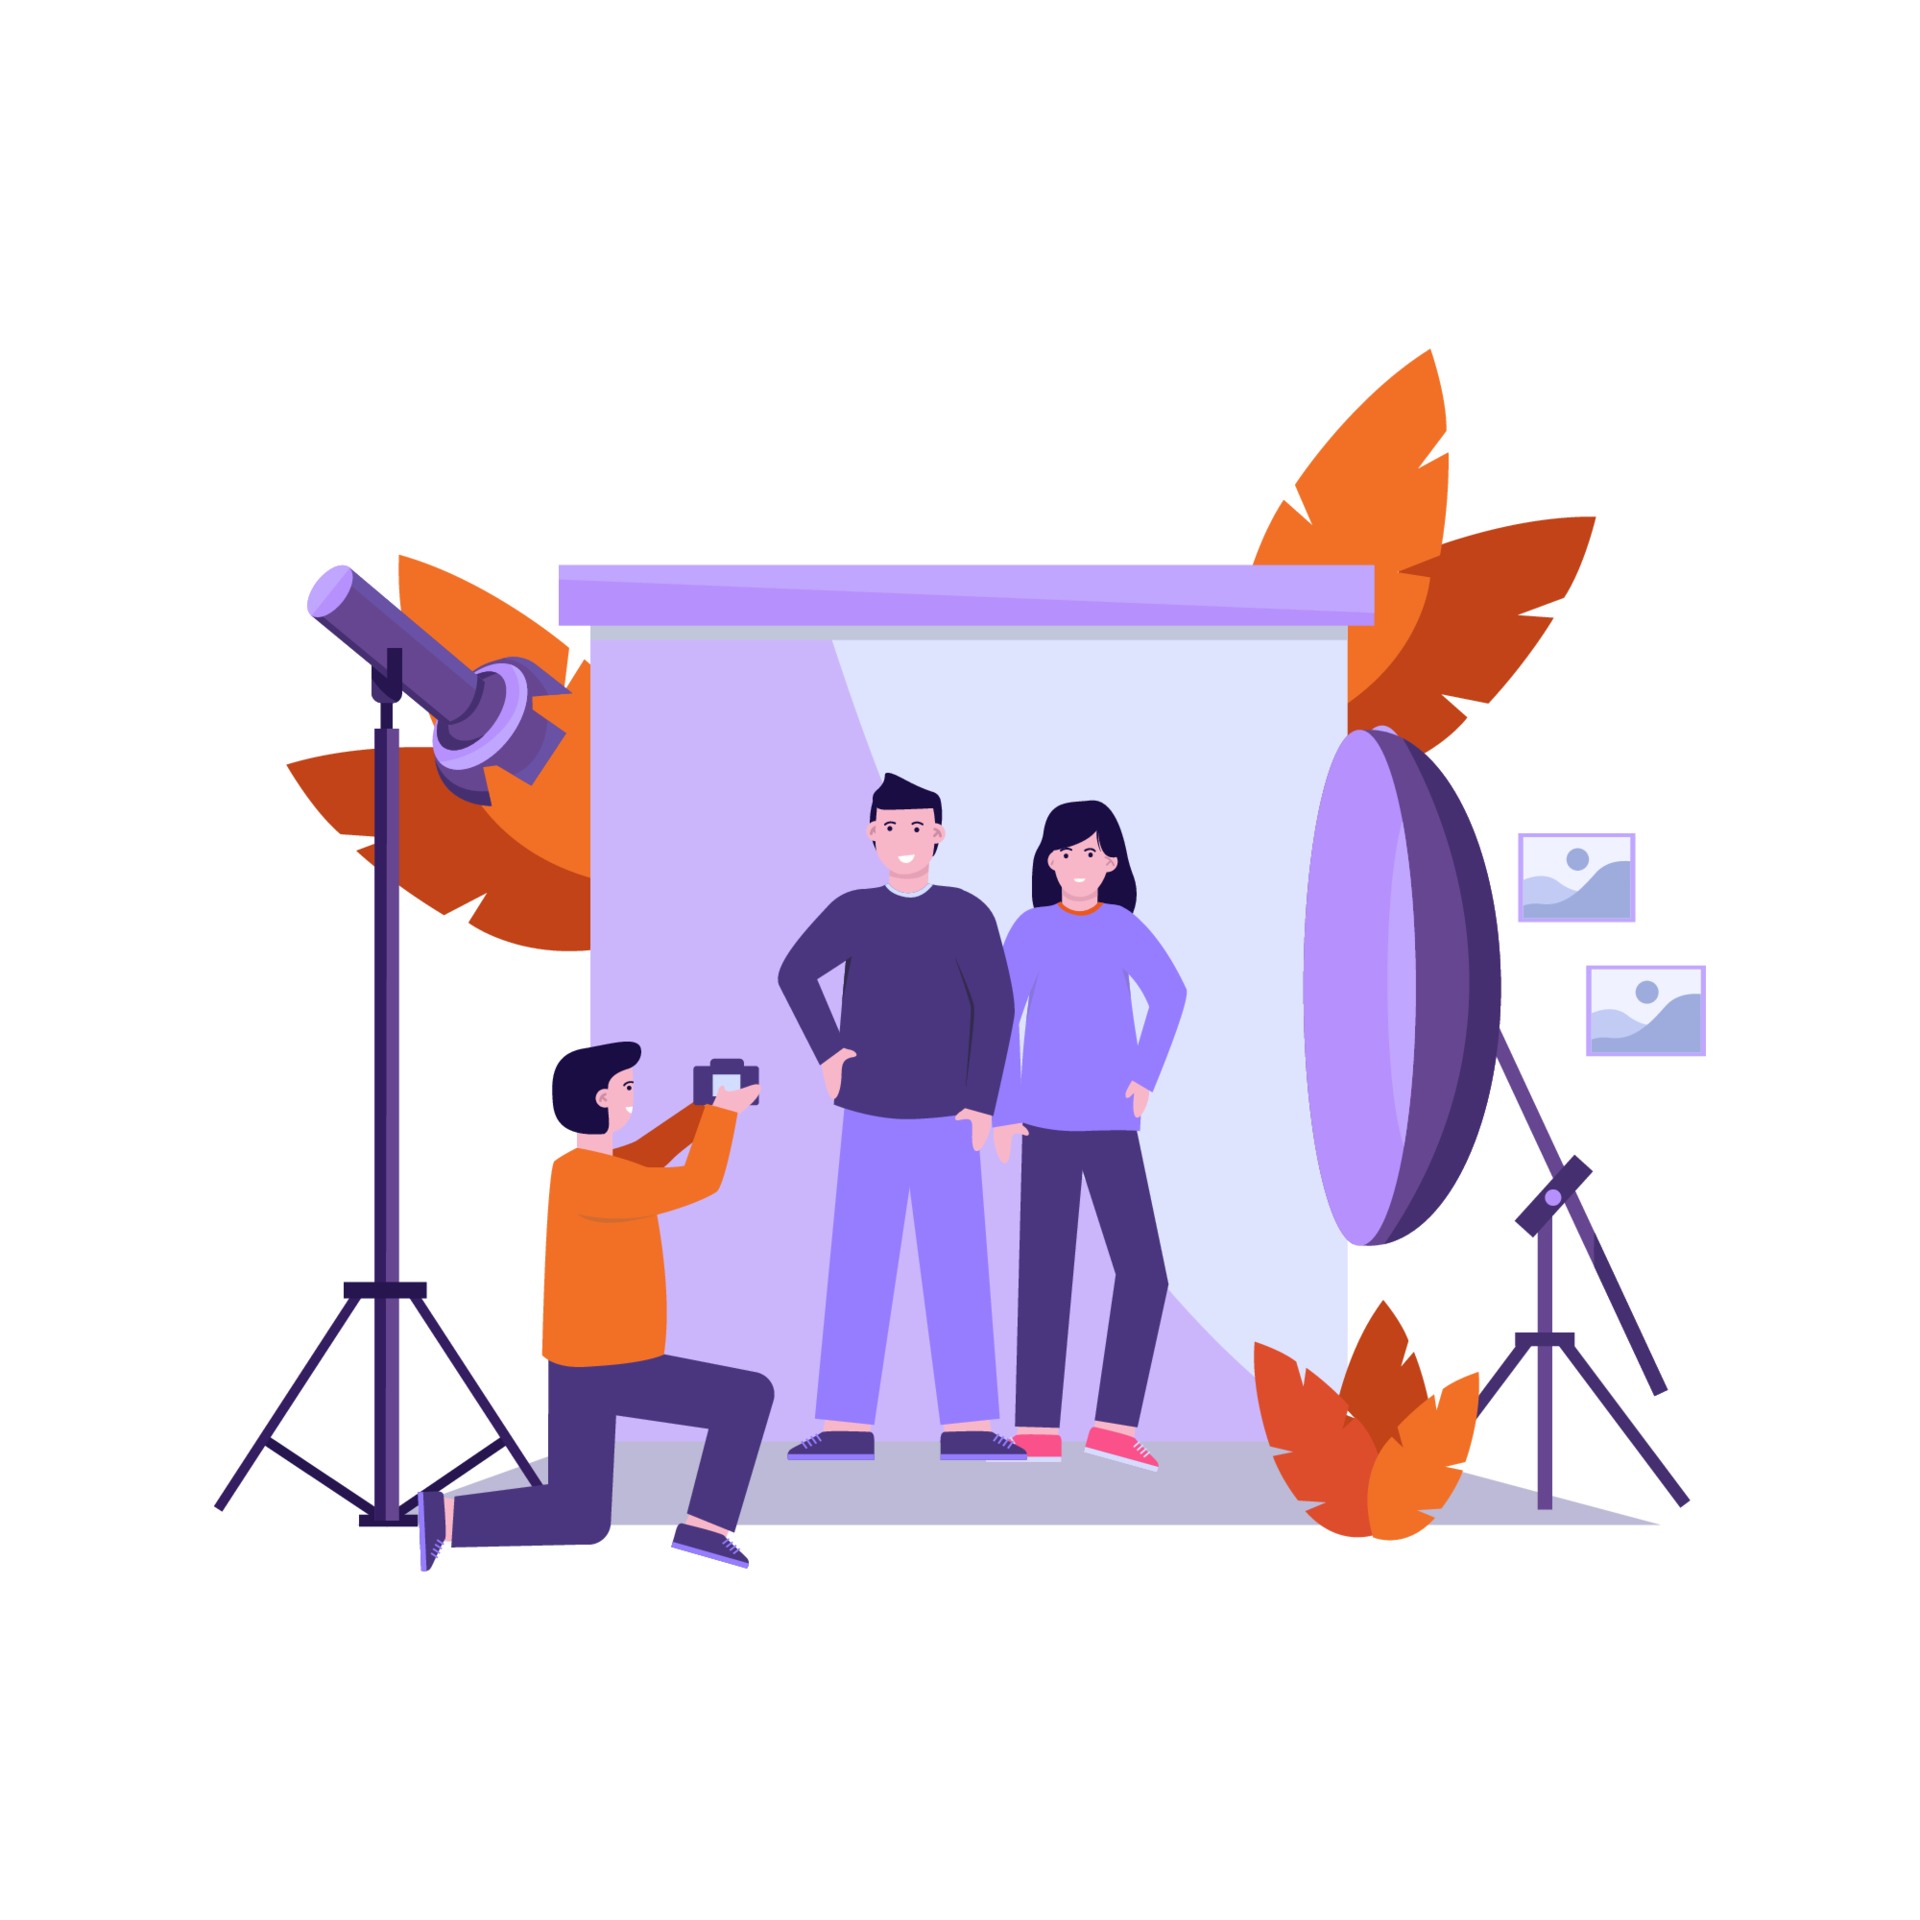 Flat Vector Illustration Of Photographer Prepares Equipment And Takes A